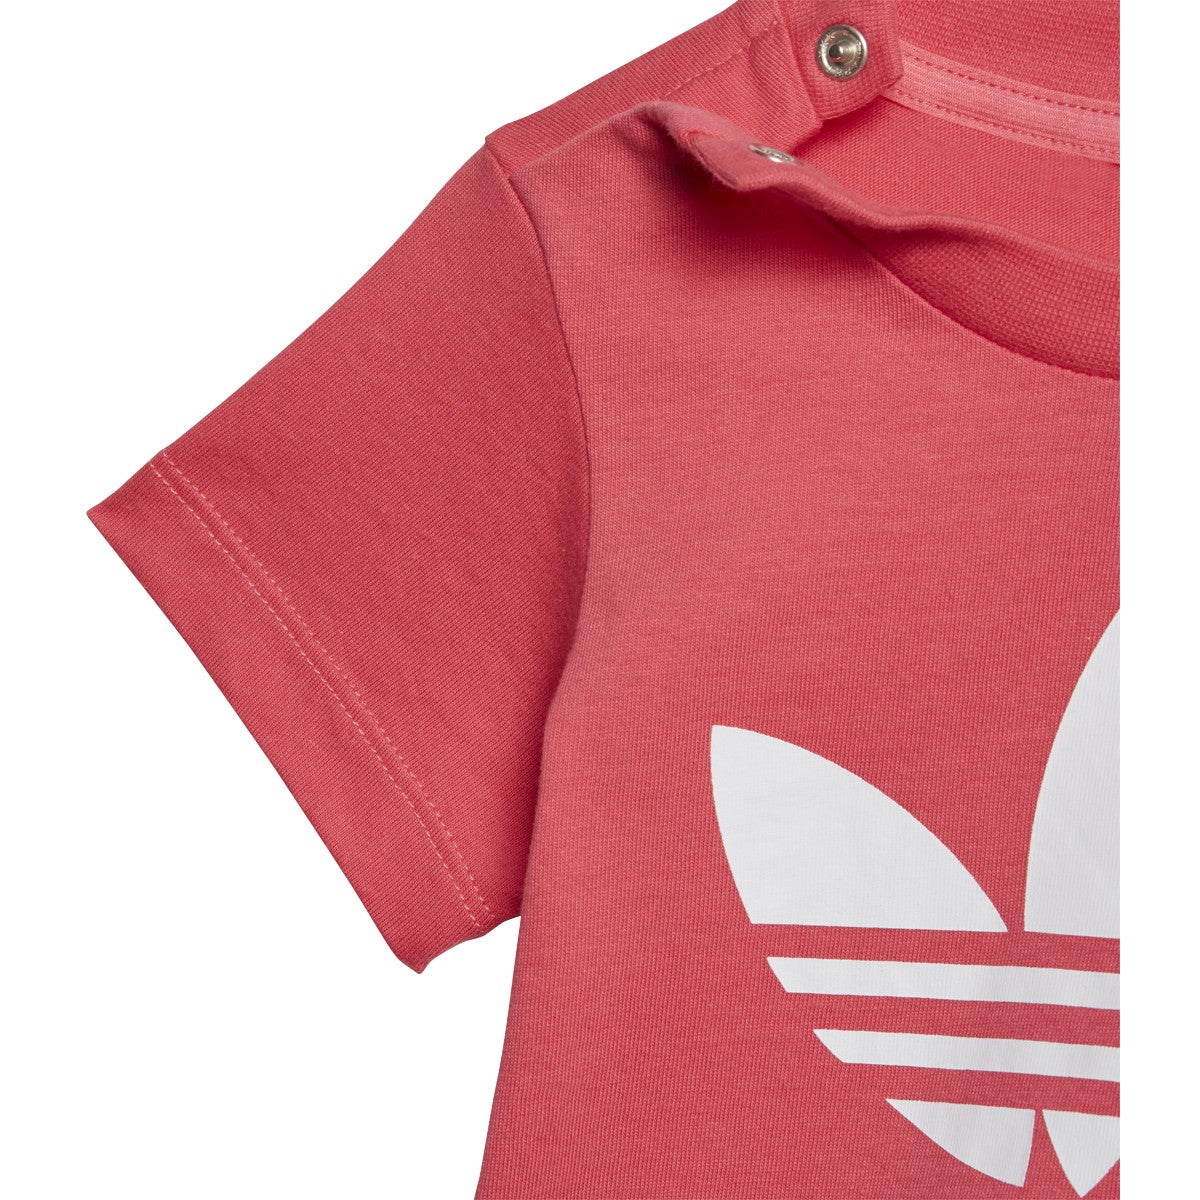 Tee Real Pink-White Adidas Infants Trefoil